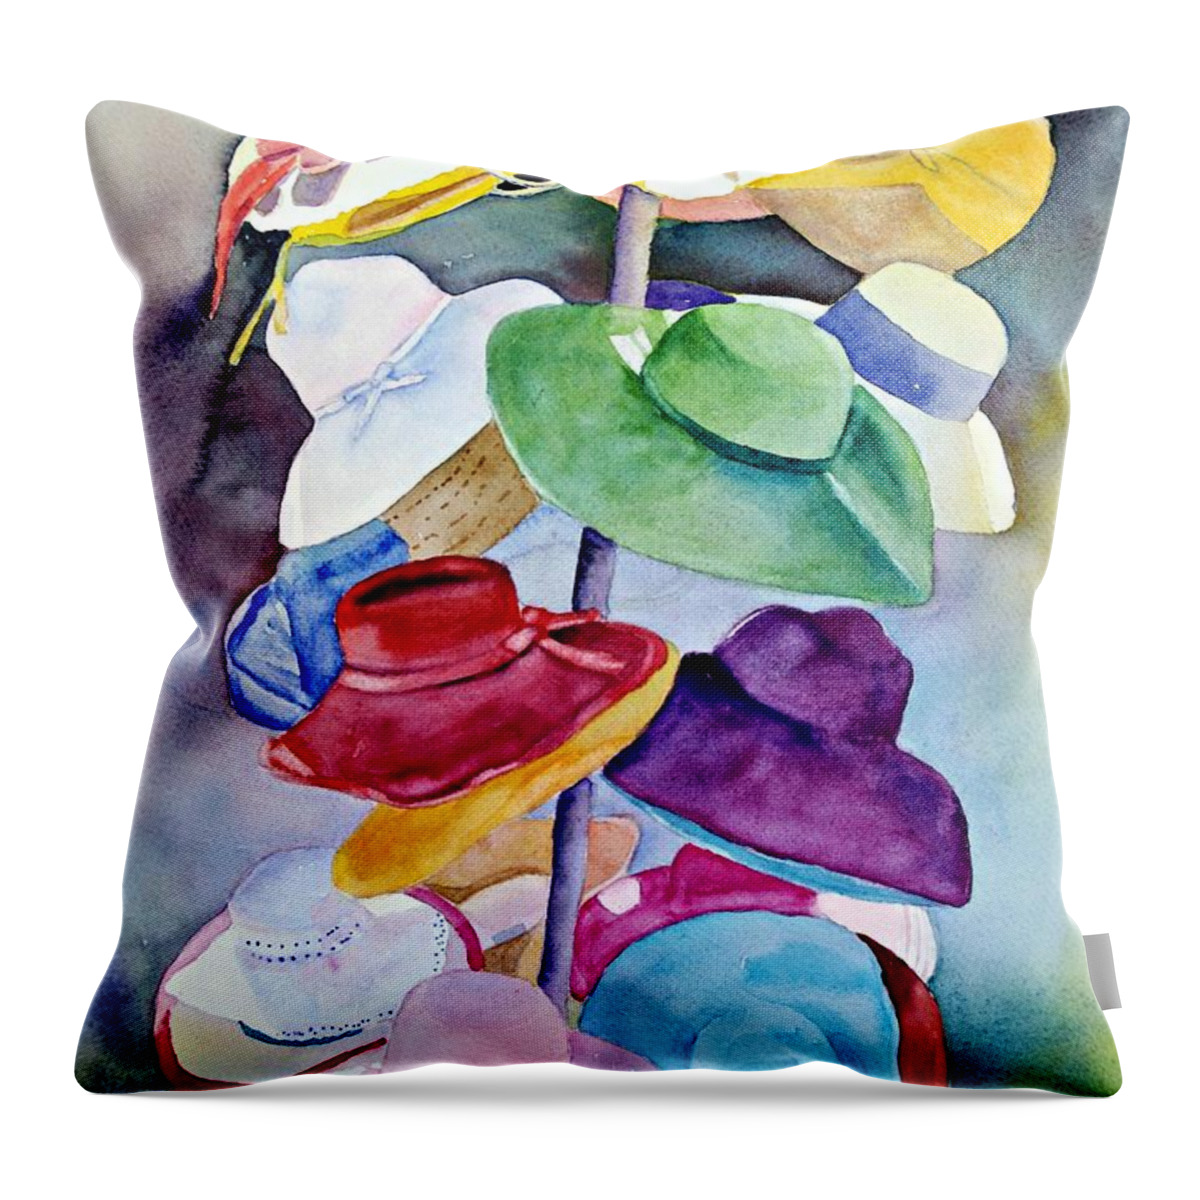 Hats Throw Pillow featuring the painting Ladies' Choice by Beth Fontenot